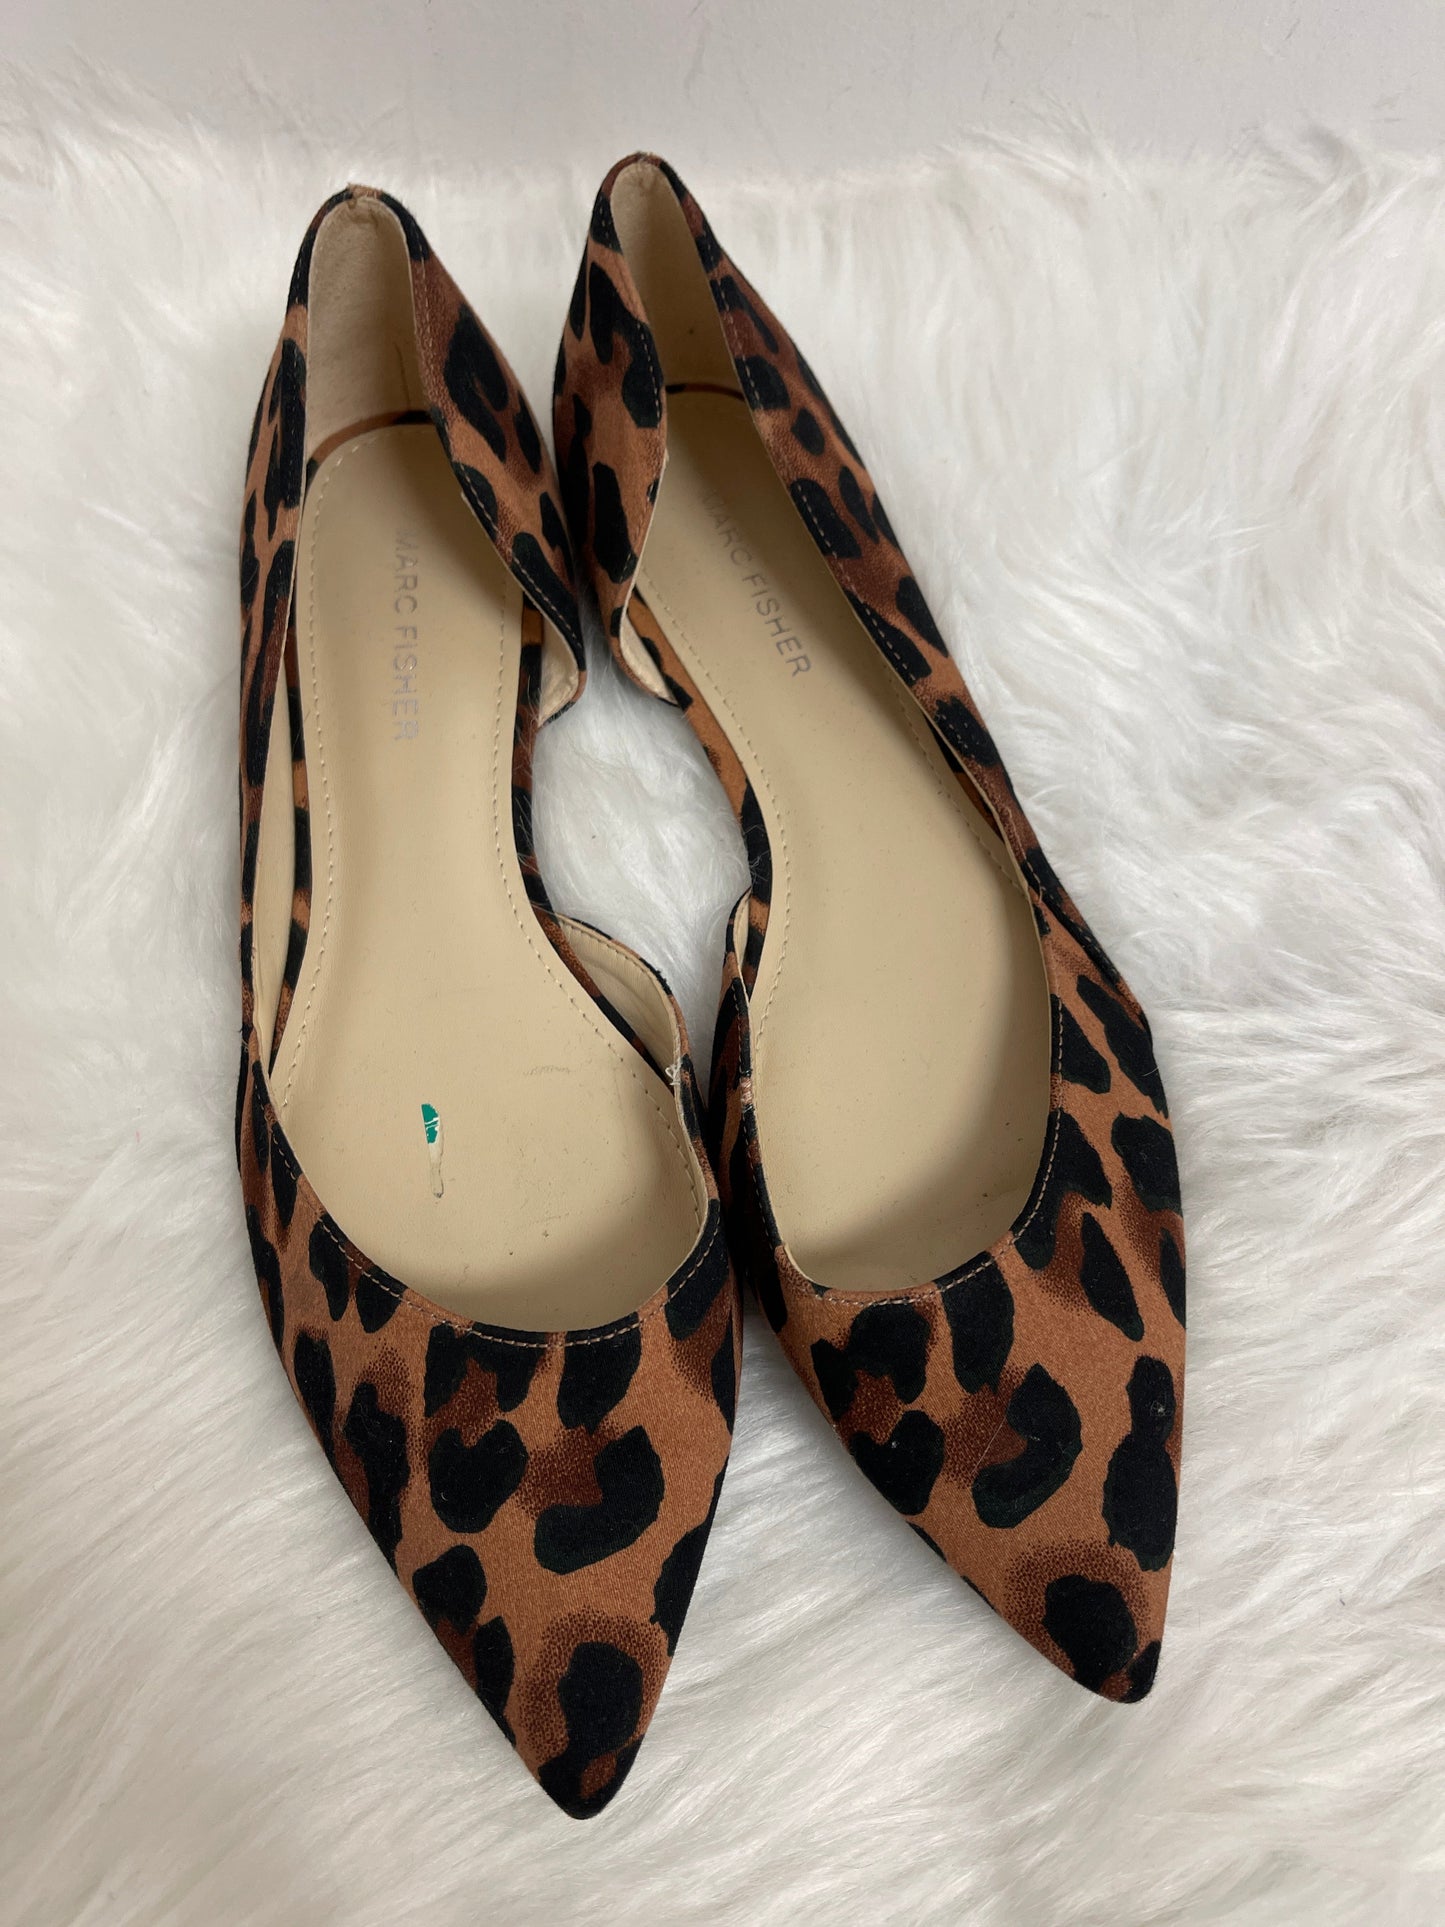 Animal Print Shoes Flats Marc Fisher, Size 8